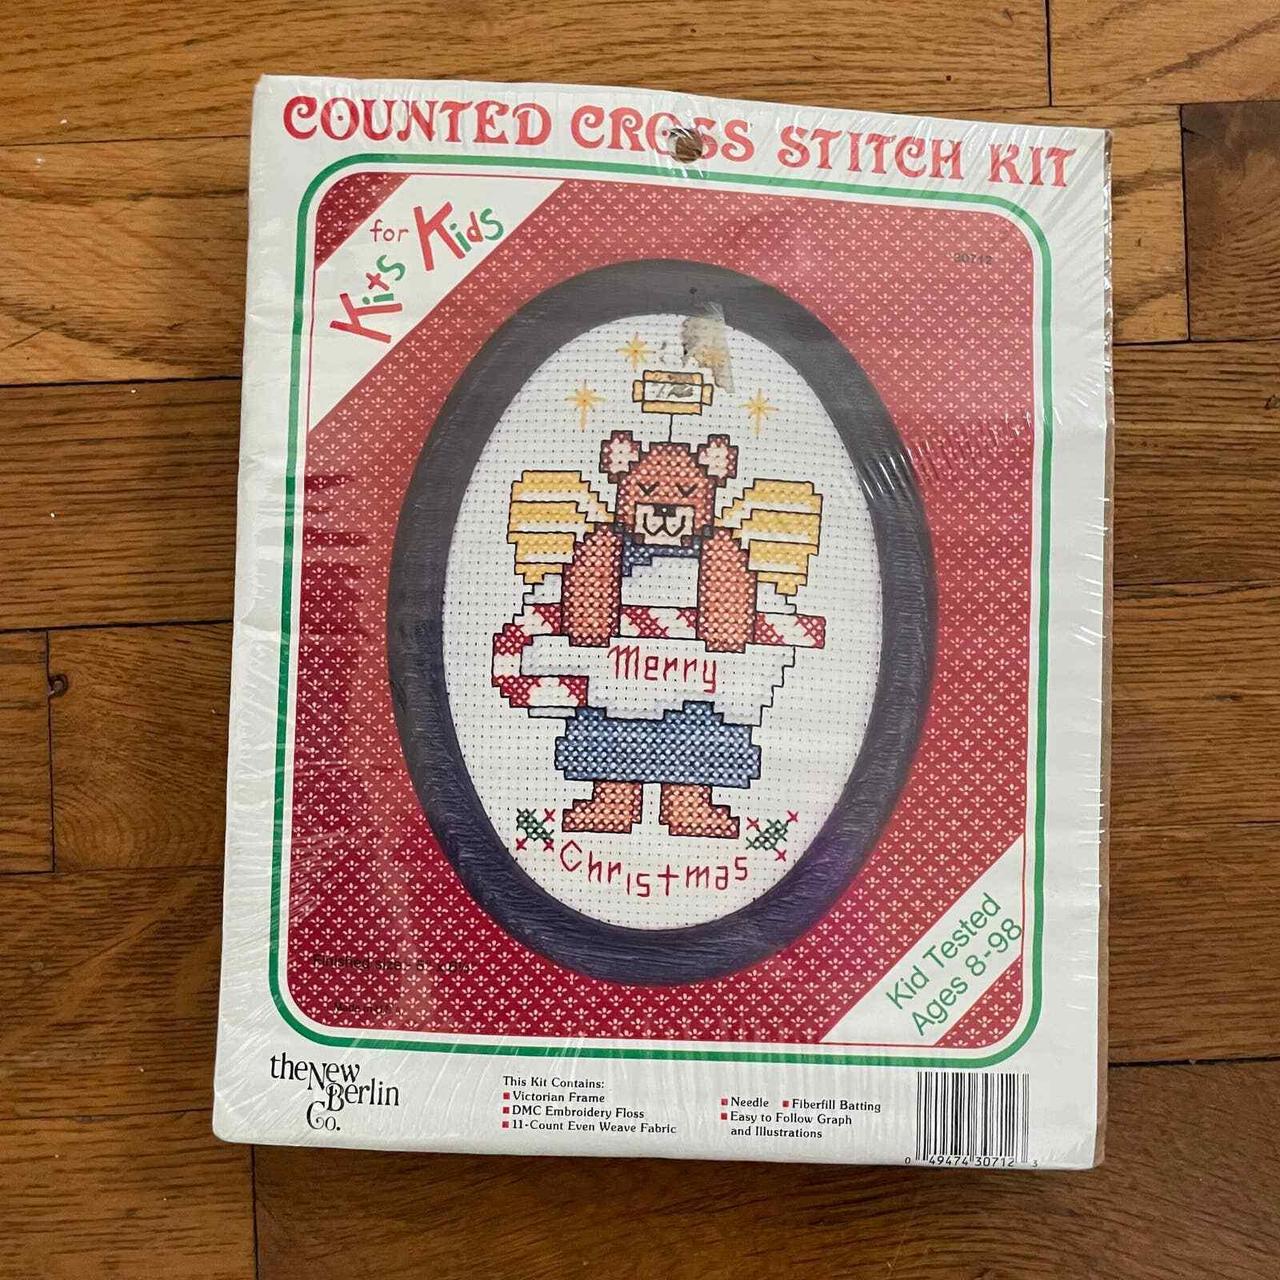 Vintage counted cross stitch kit by New Berlin - Depop